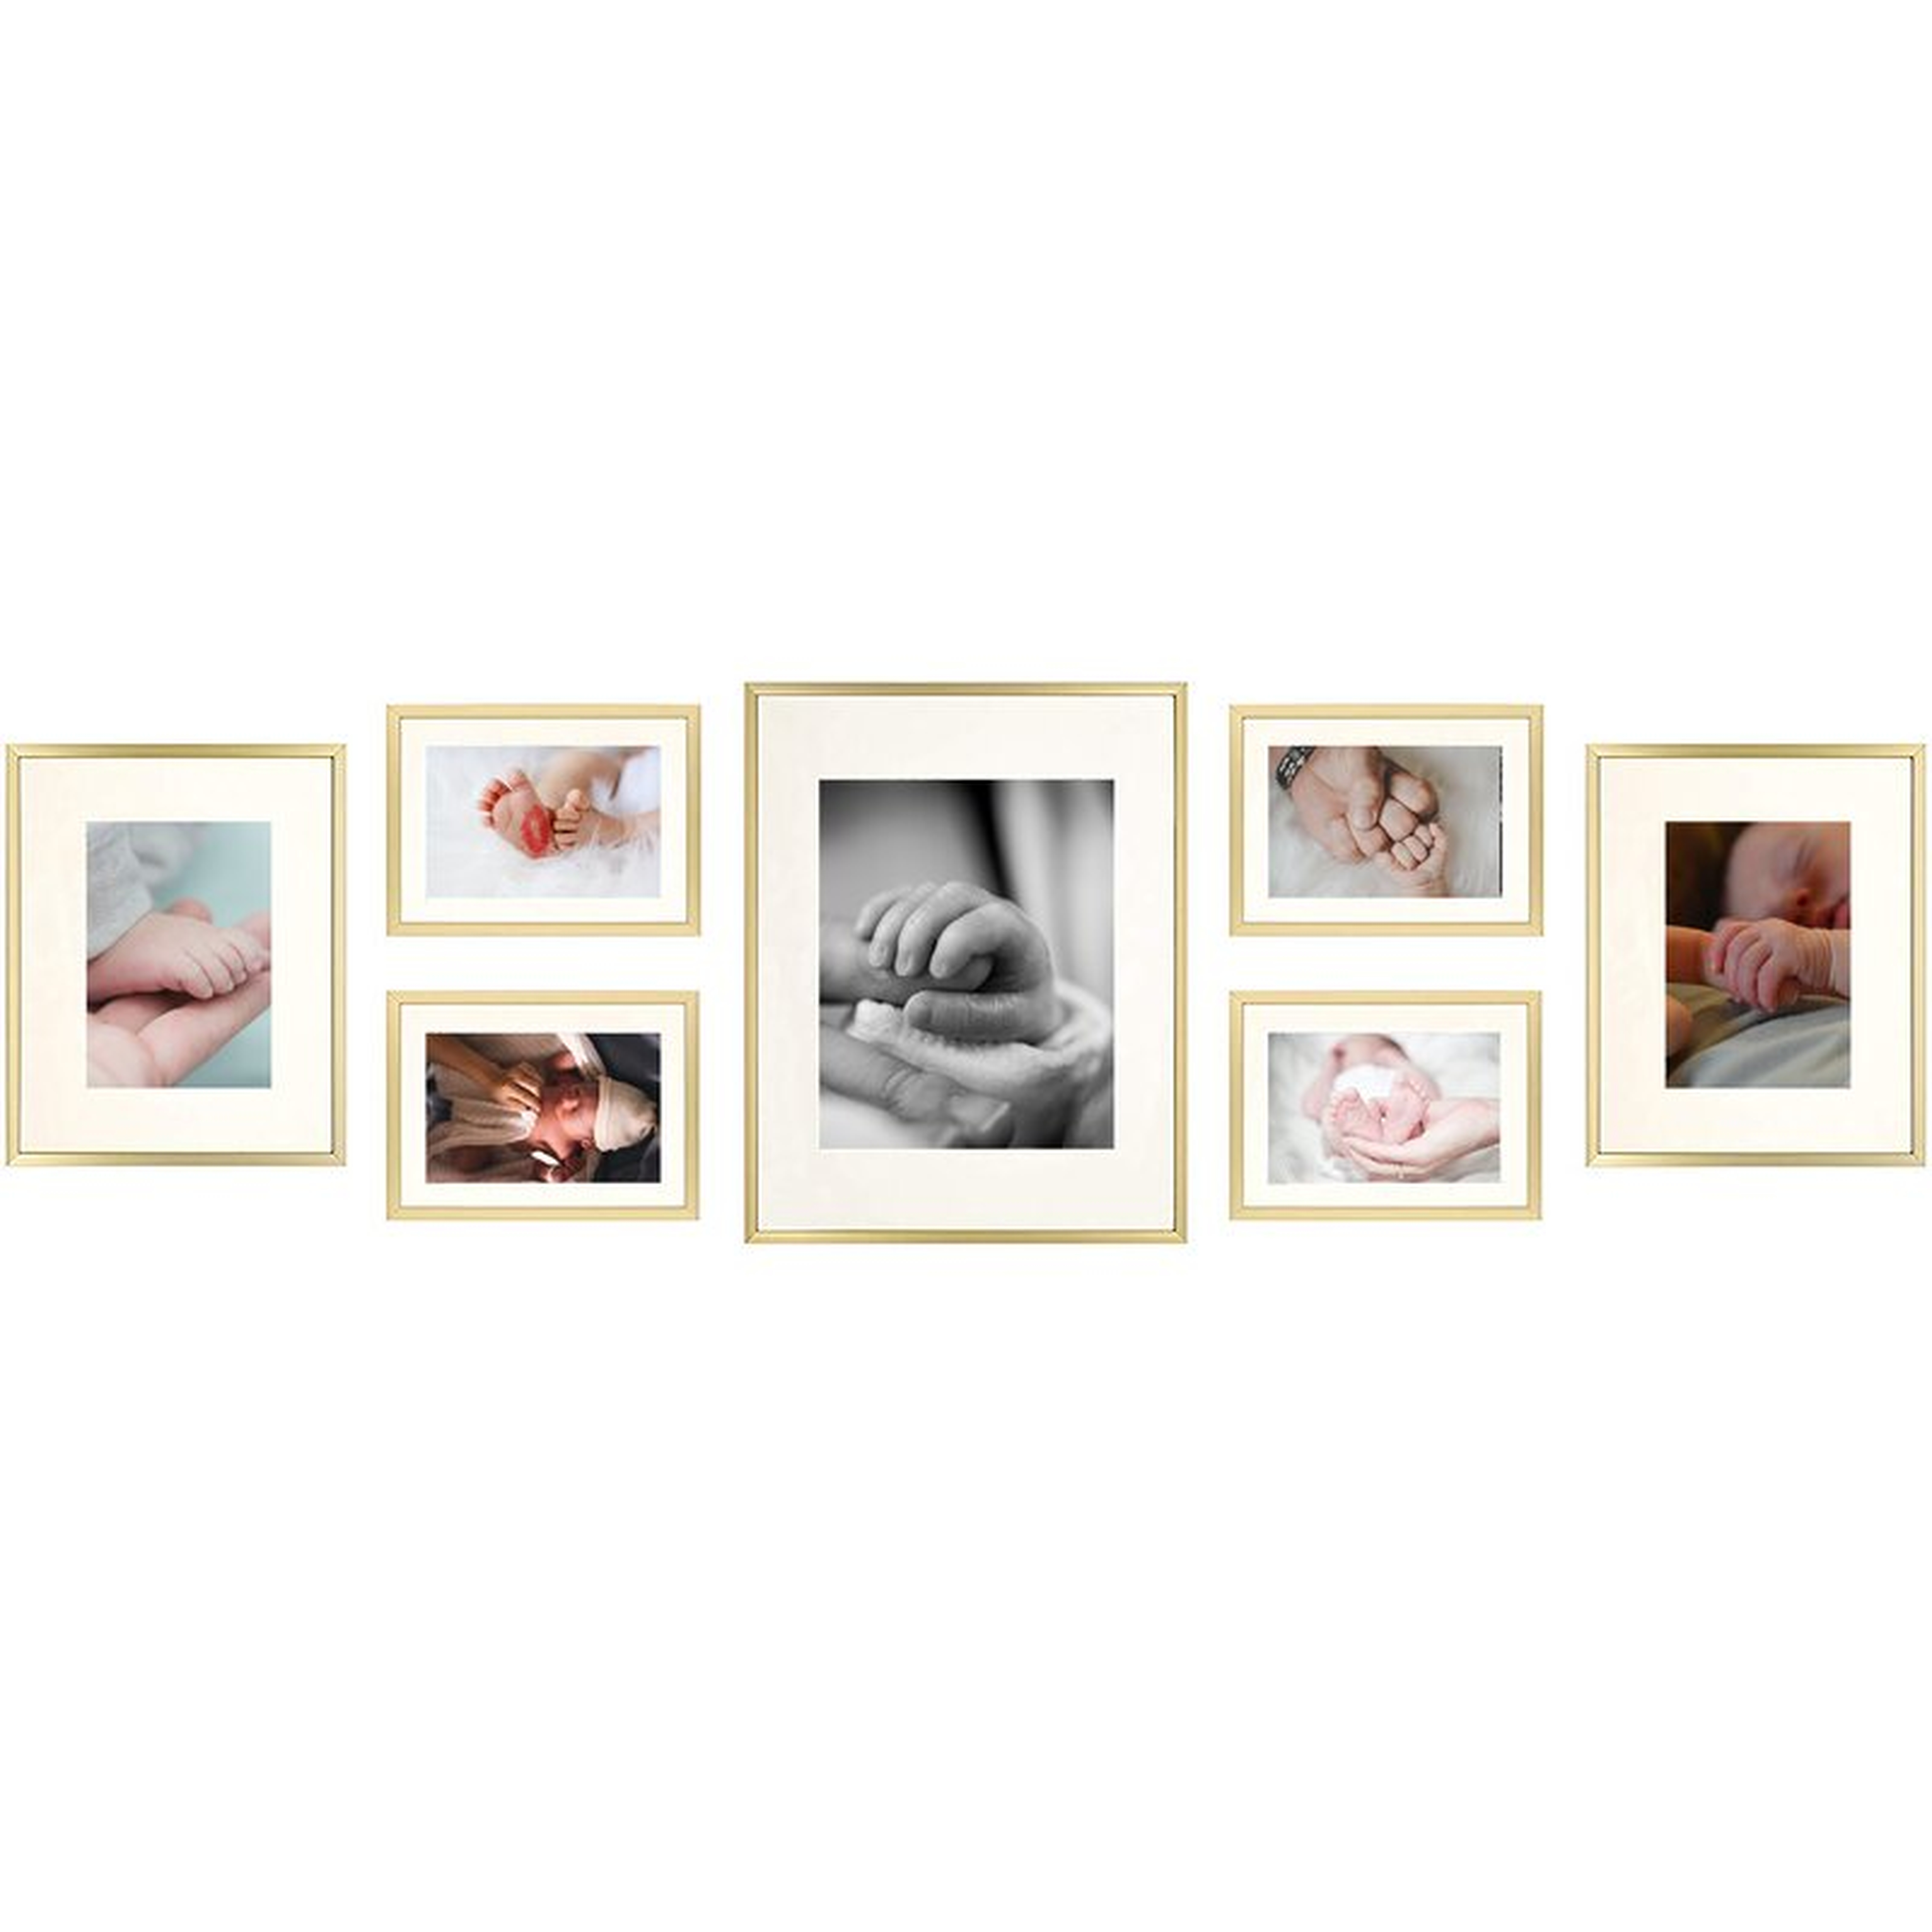 7 Piece Alisson Gallery Wall Aluminum Picture Frame Set-Gold - Wayfair